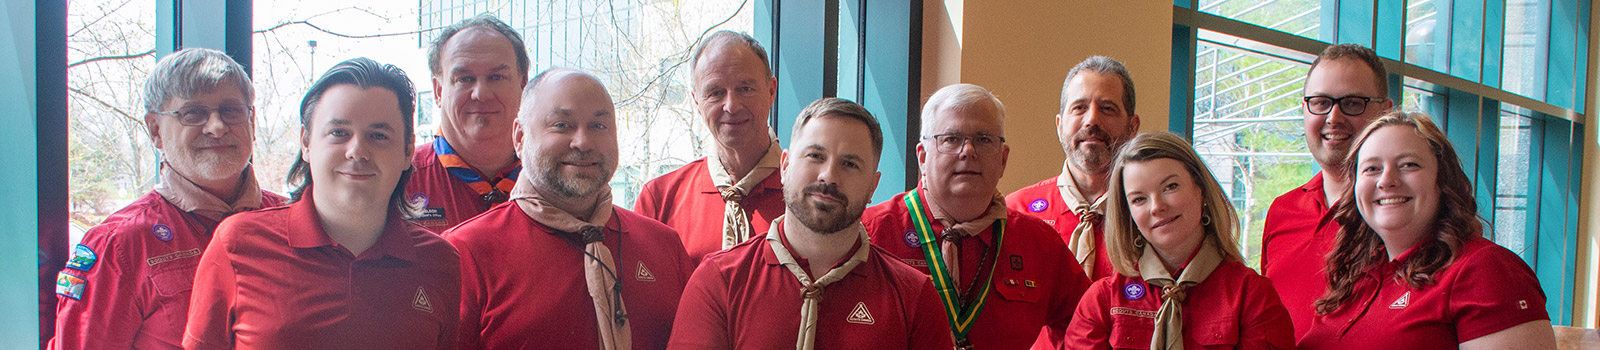 Scouts Canada's Board of Governors